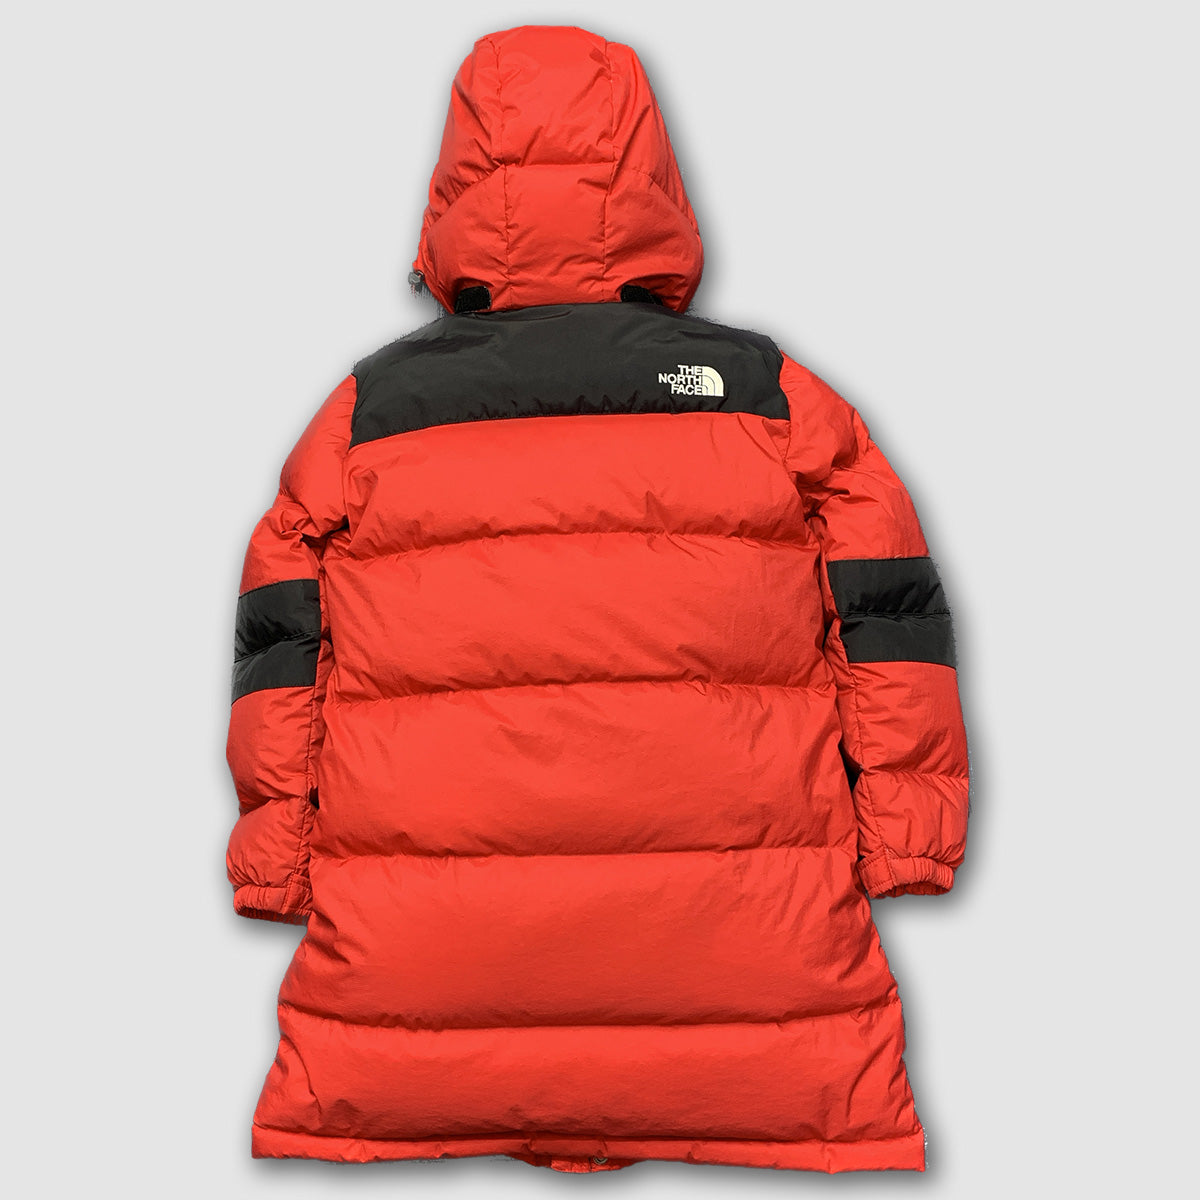 30015 【THE NORTH FACE】ザノースフェイス キッズ HYVENT ハイベント